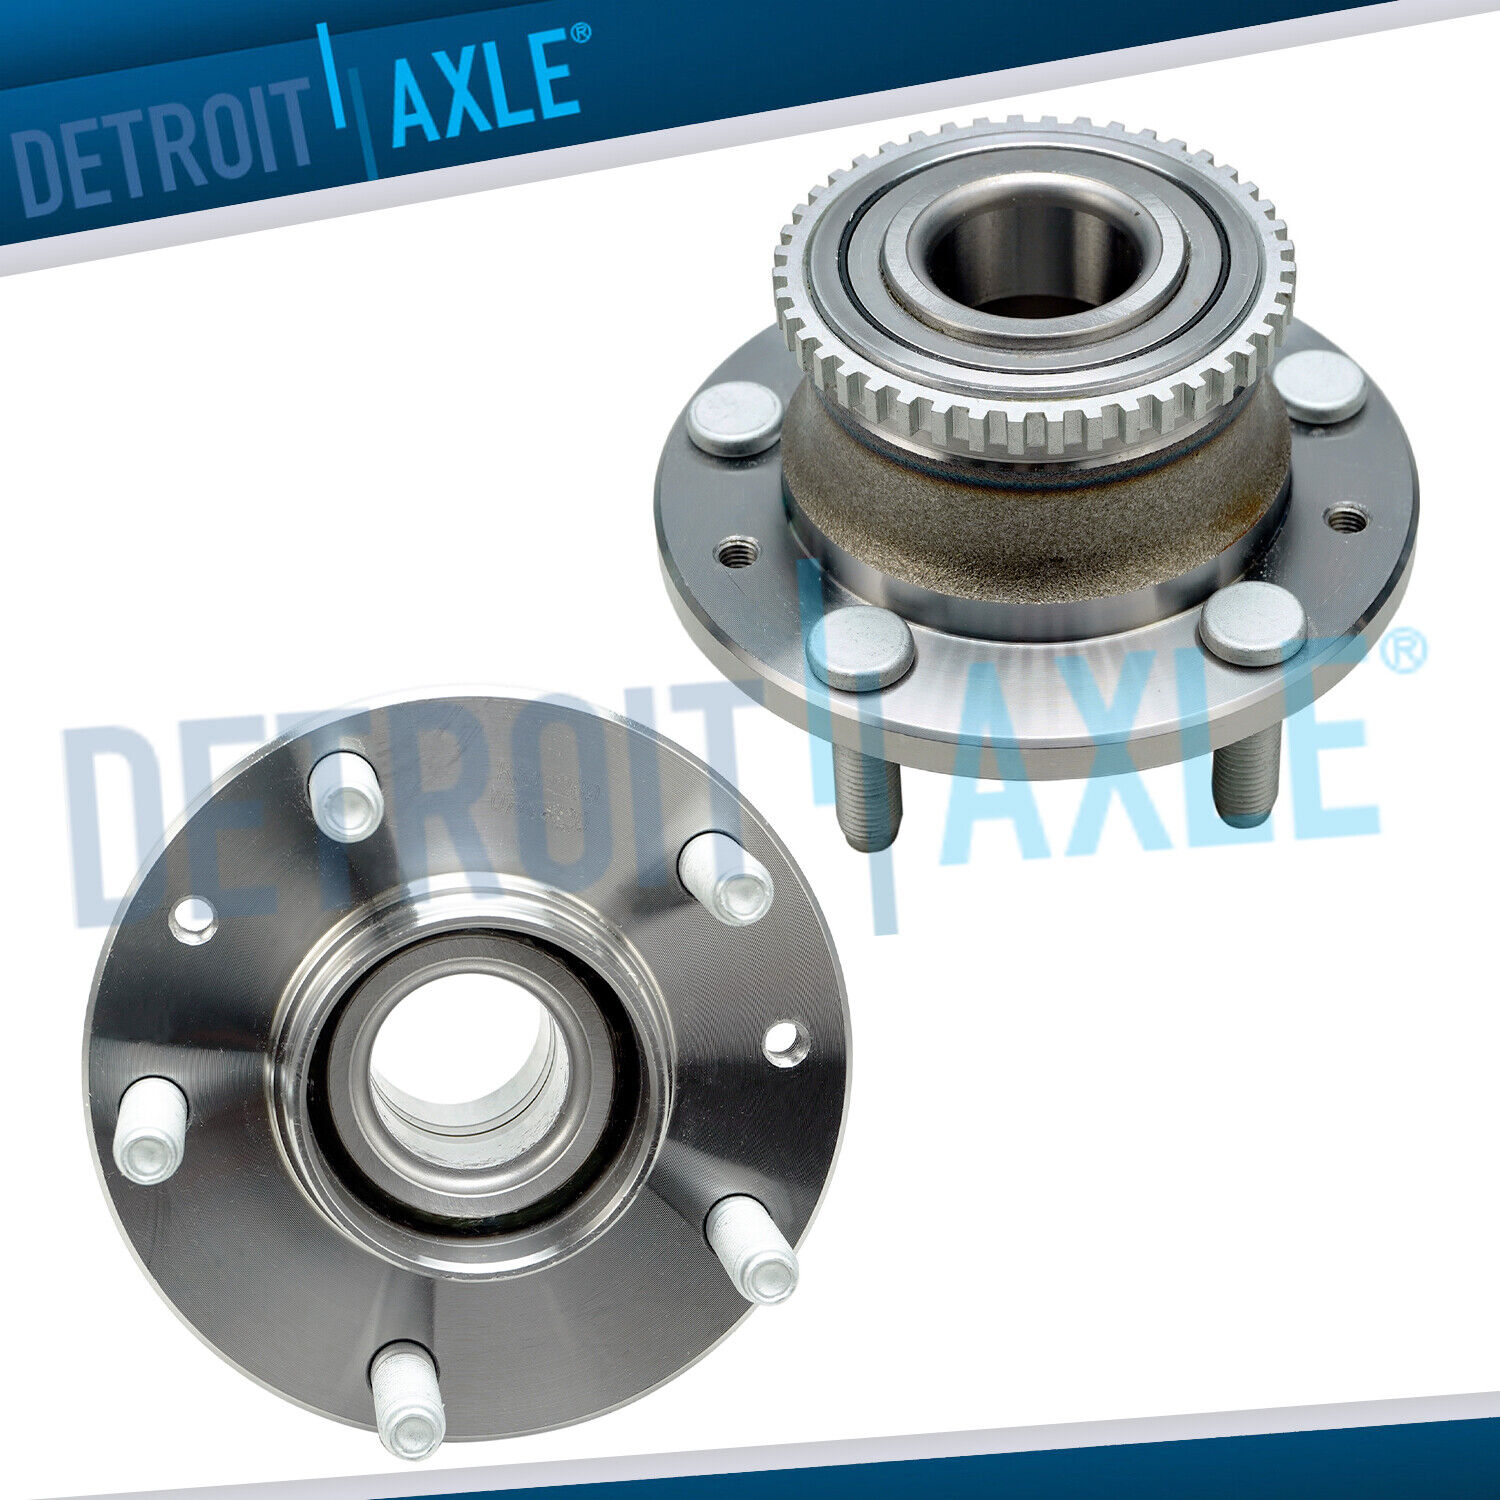 REAR or FRONT Wheel Bearing & Hub for Mazda MPV Protege Protege5 Millenia 929